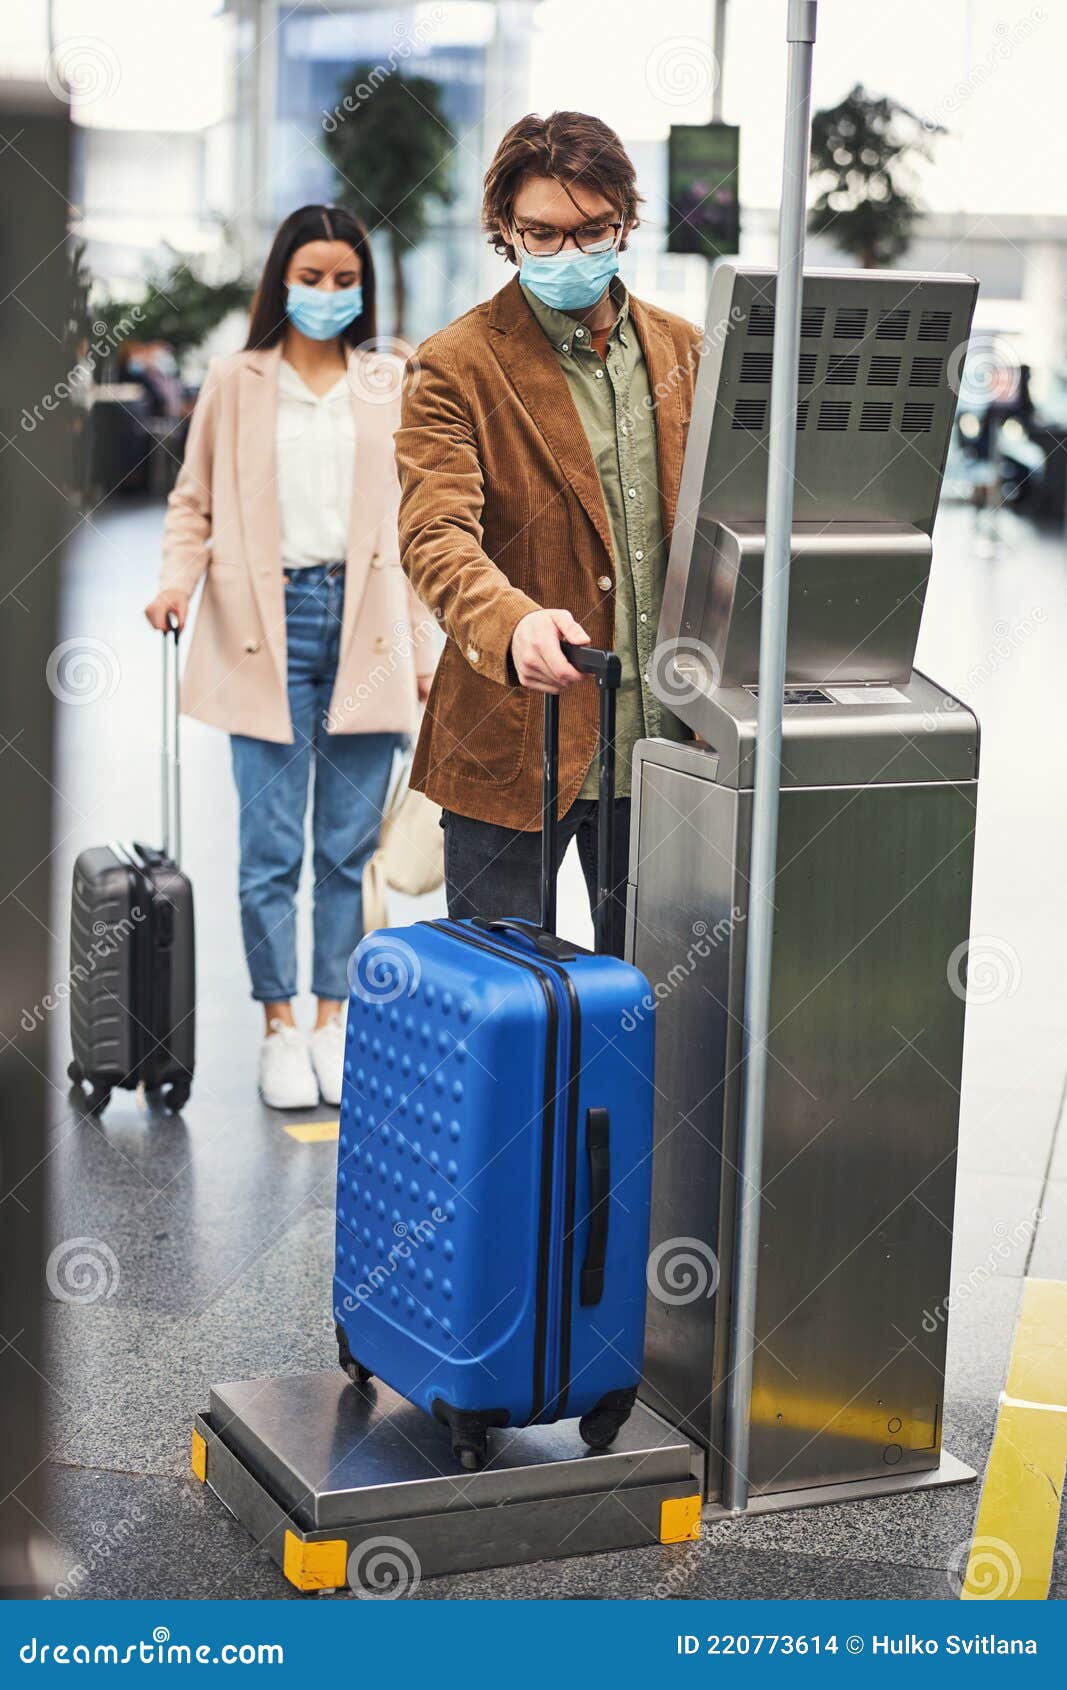 https://thumbs.dreamstime.com/z/male-passenger-using-baggage-check-weighing-machine-airport-stylish-man-medical-mask-checking-luggage-weight-woman-220773614.jpg